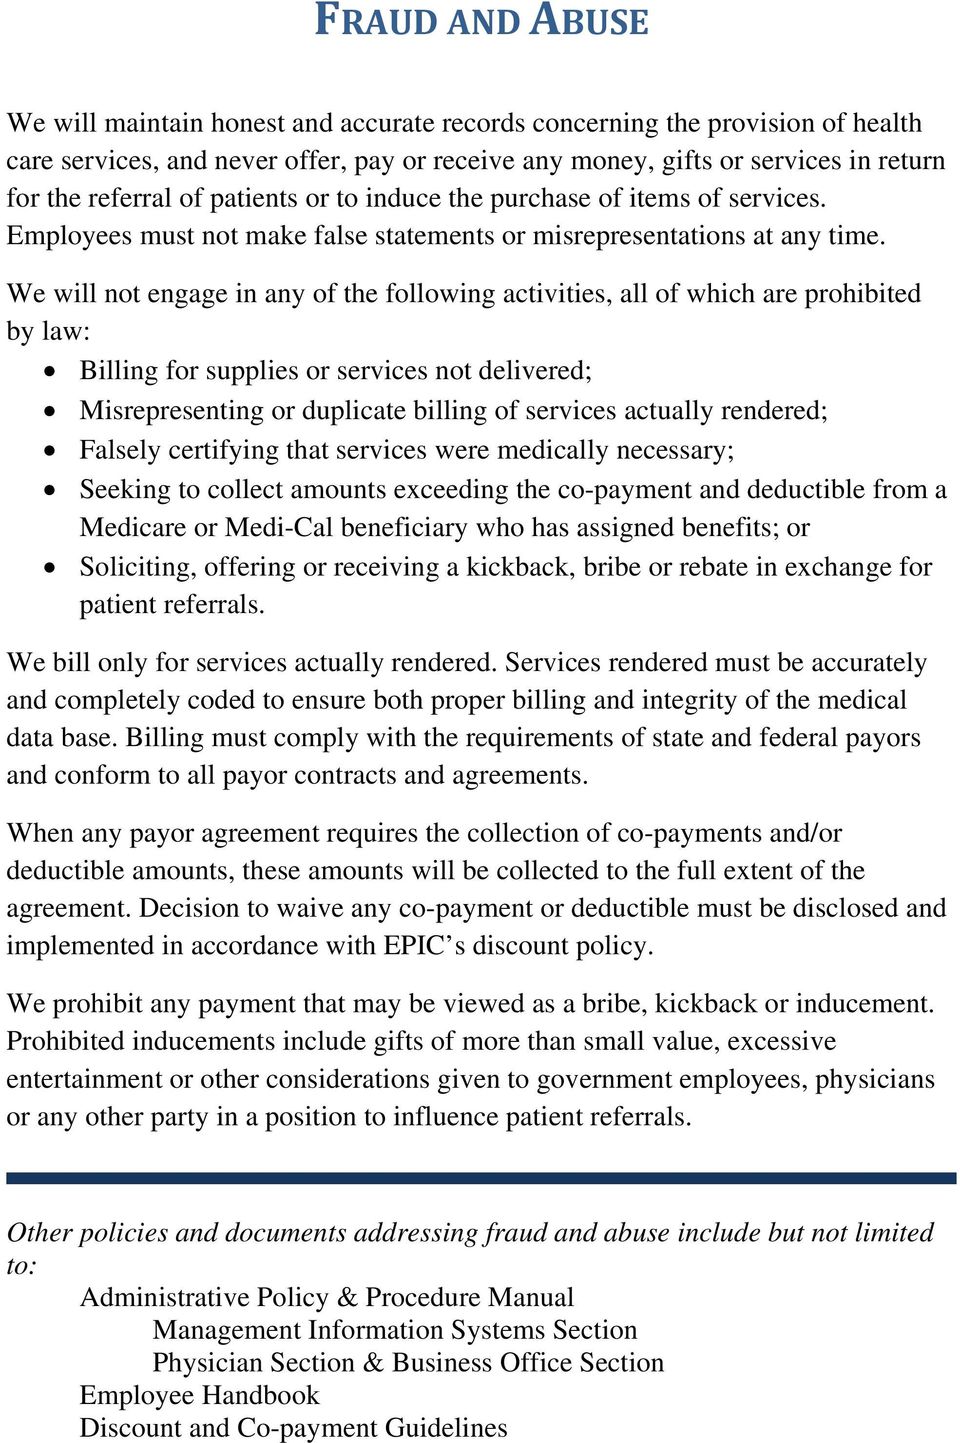 We will not engage in any of the following activities, all of which are prohibited by law: Billing for supplies or services not delivered; Misrepresenting or duplicate billing of services actually